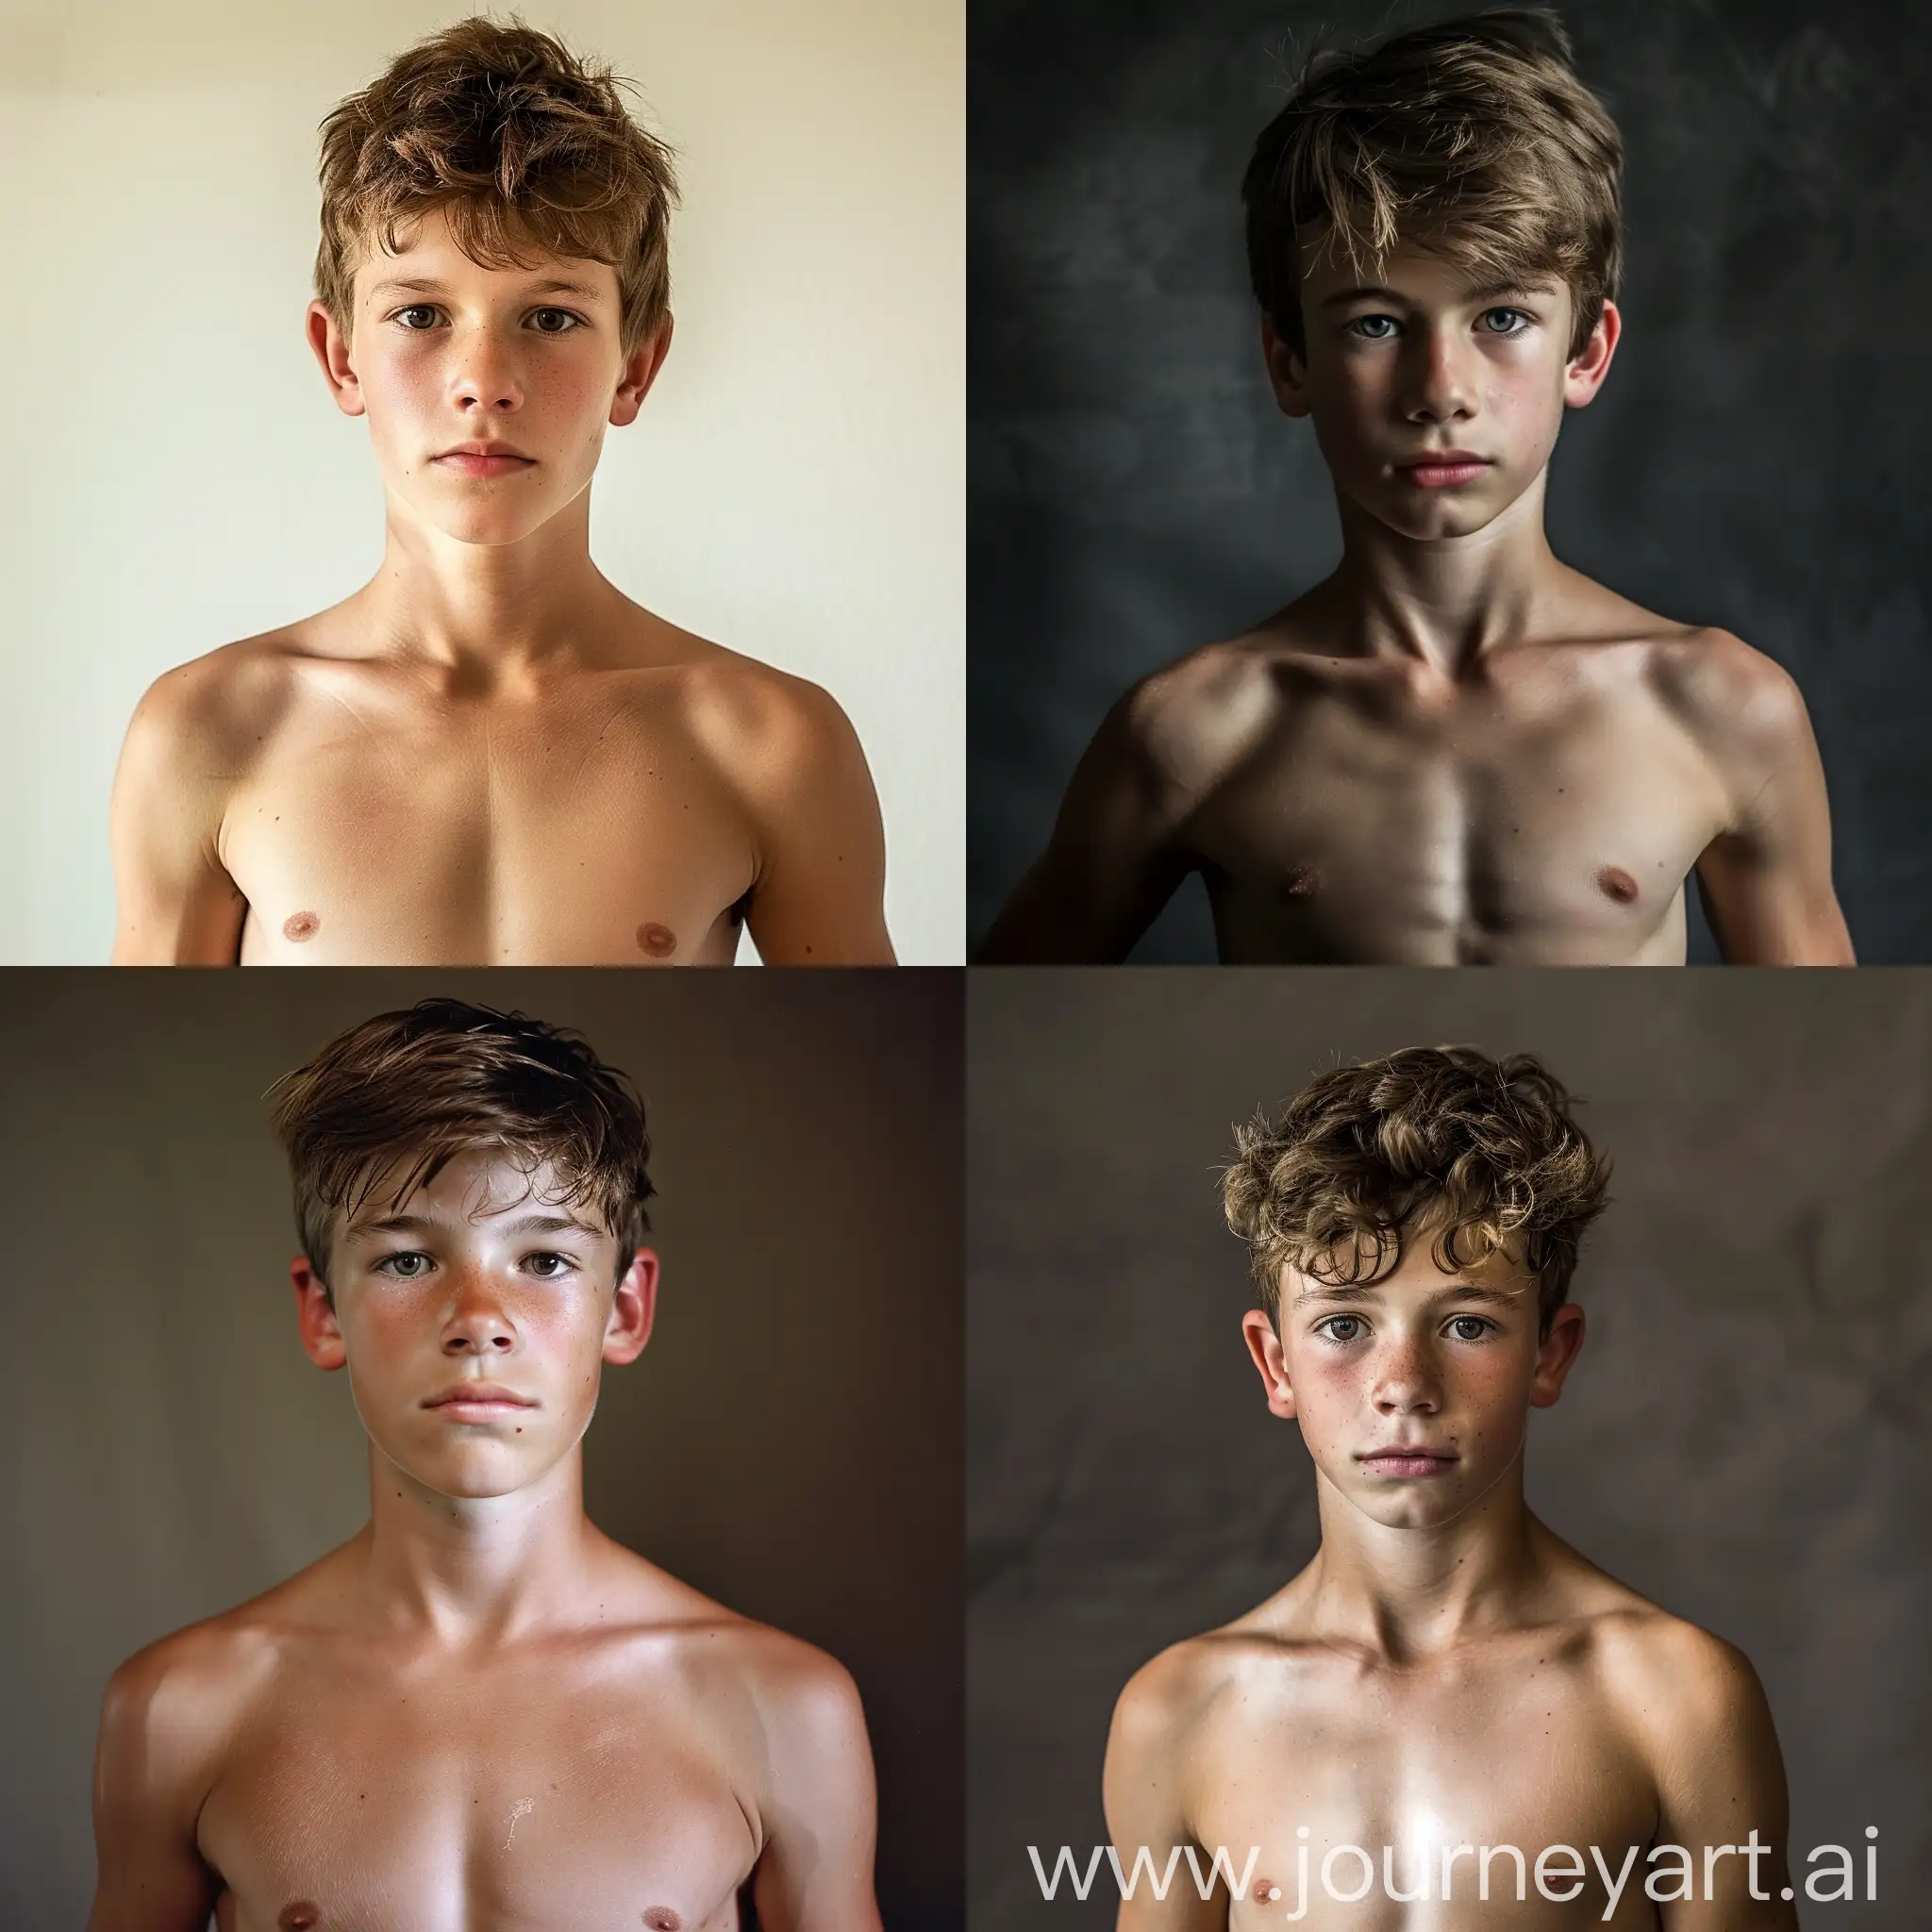 Teenage-Boy-with-SixPack-Abs